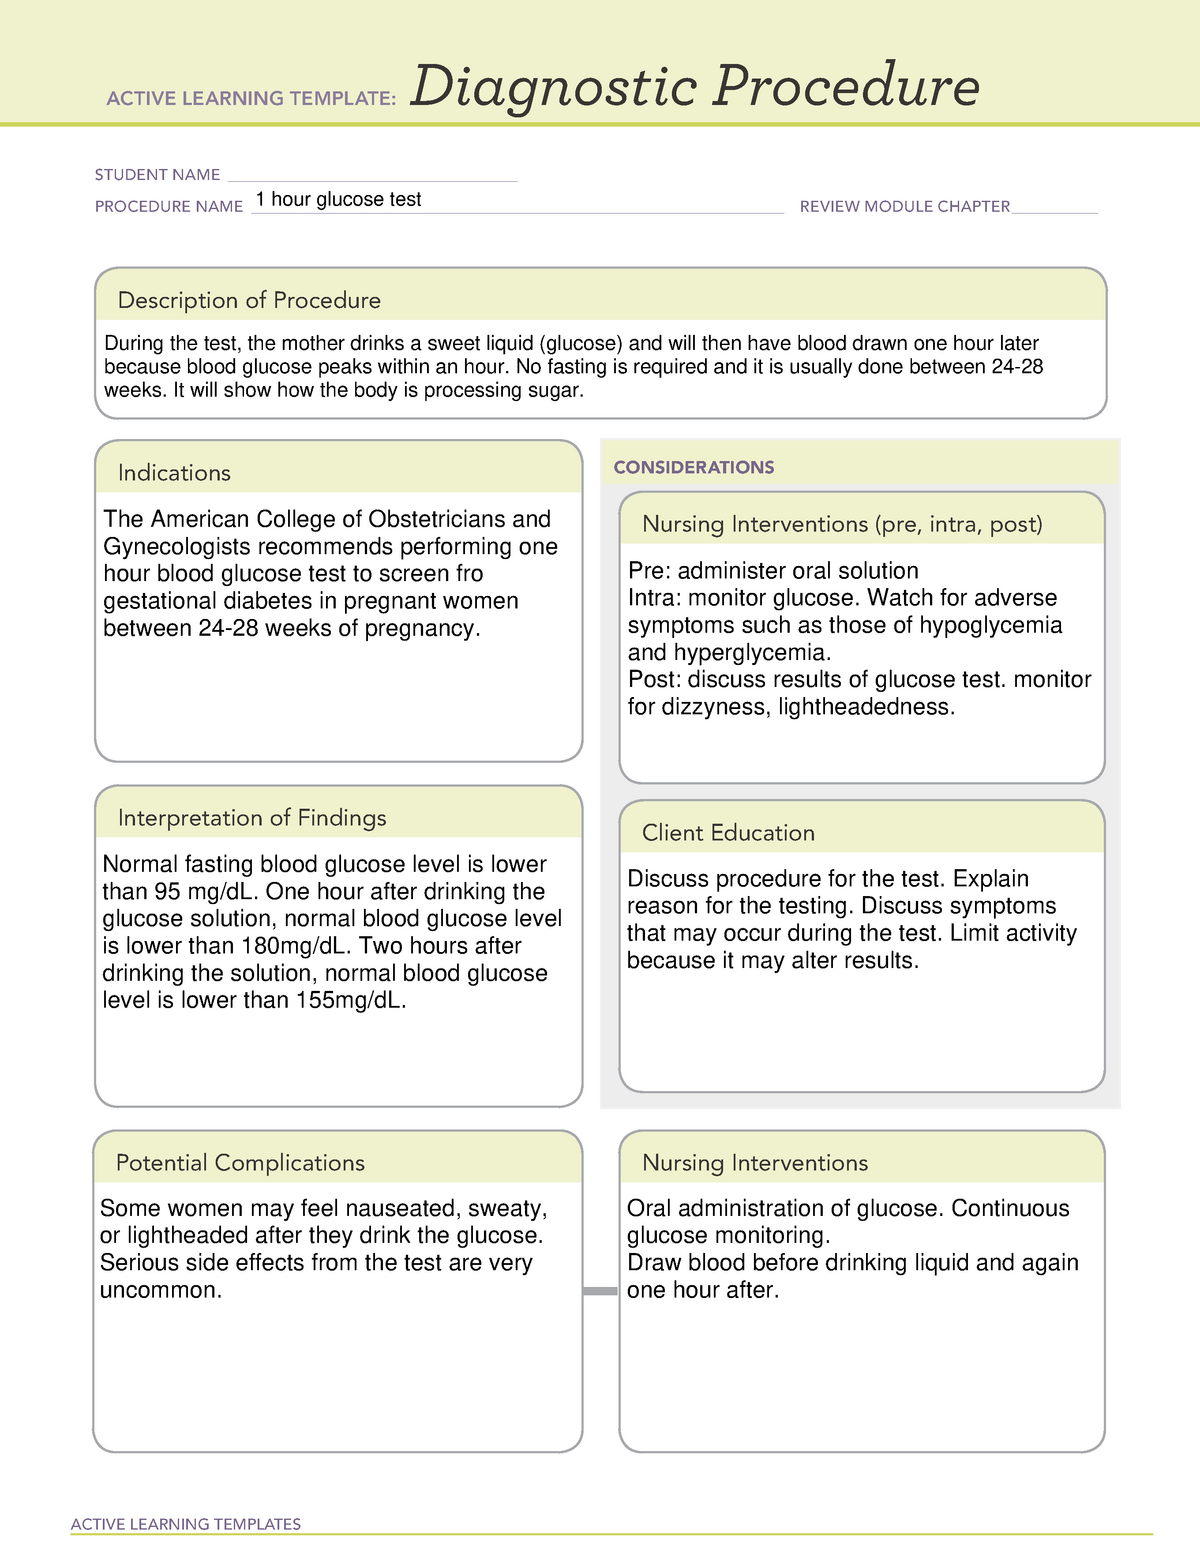 Diagnostic procedure 1 hour Glucose ACTIVE LEARNING TEMPLATES